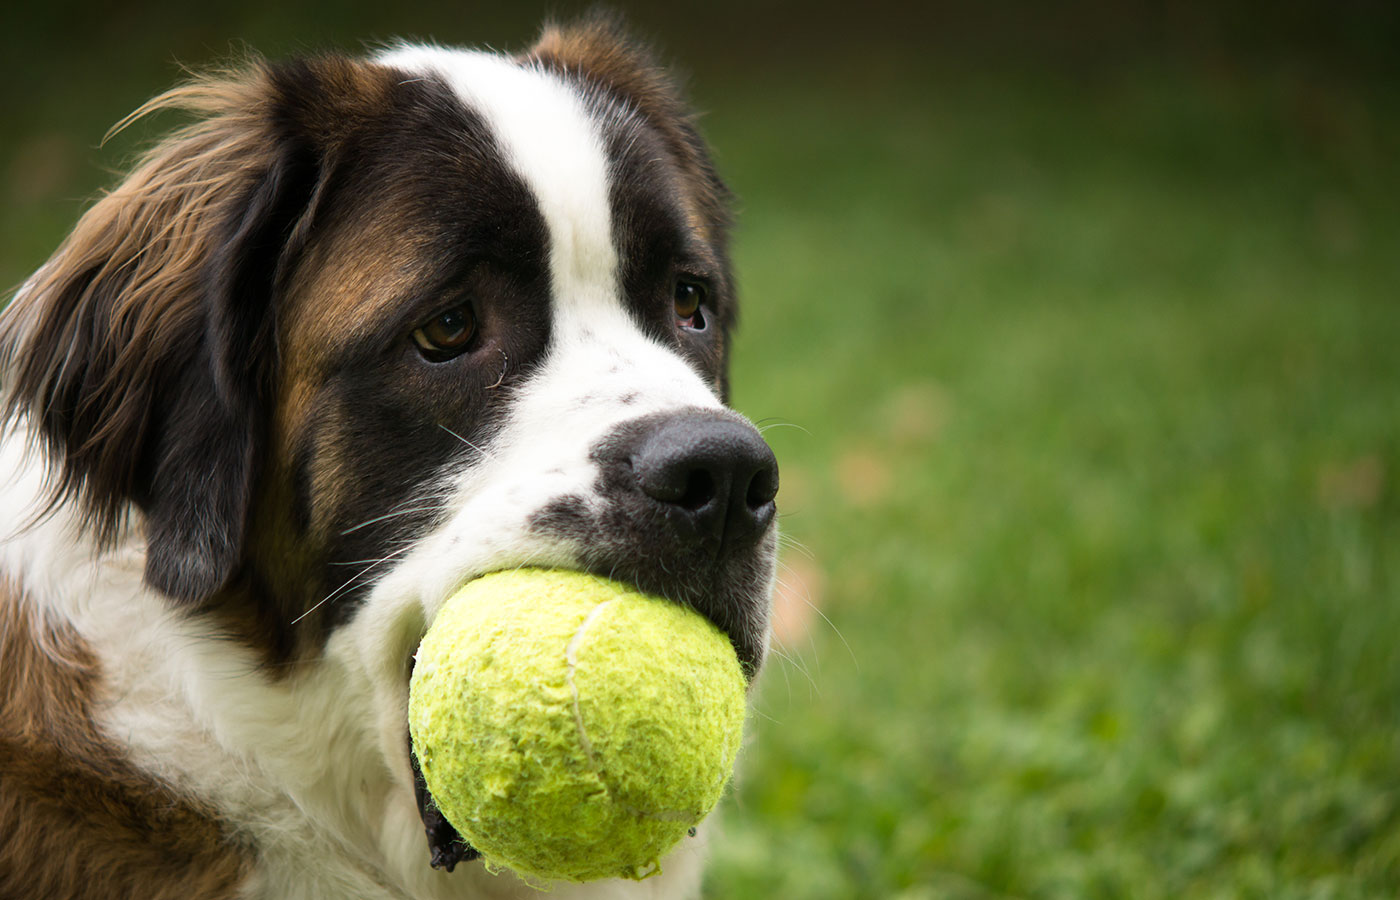 A giant St. Bernard dog plays in a grass yard with a tennis ball as a toy.